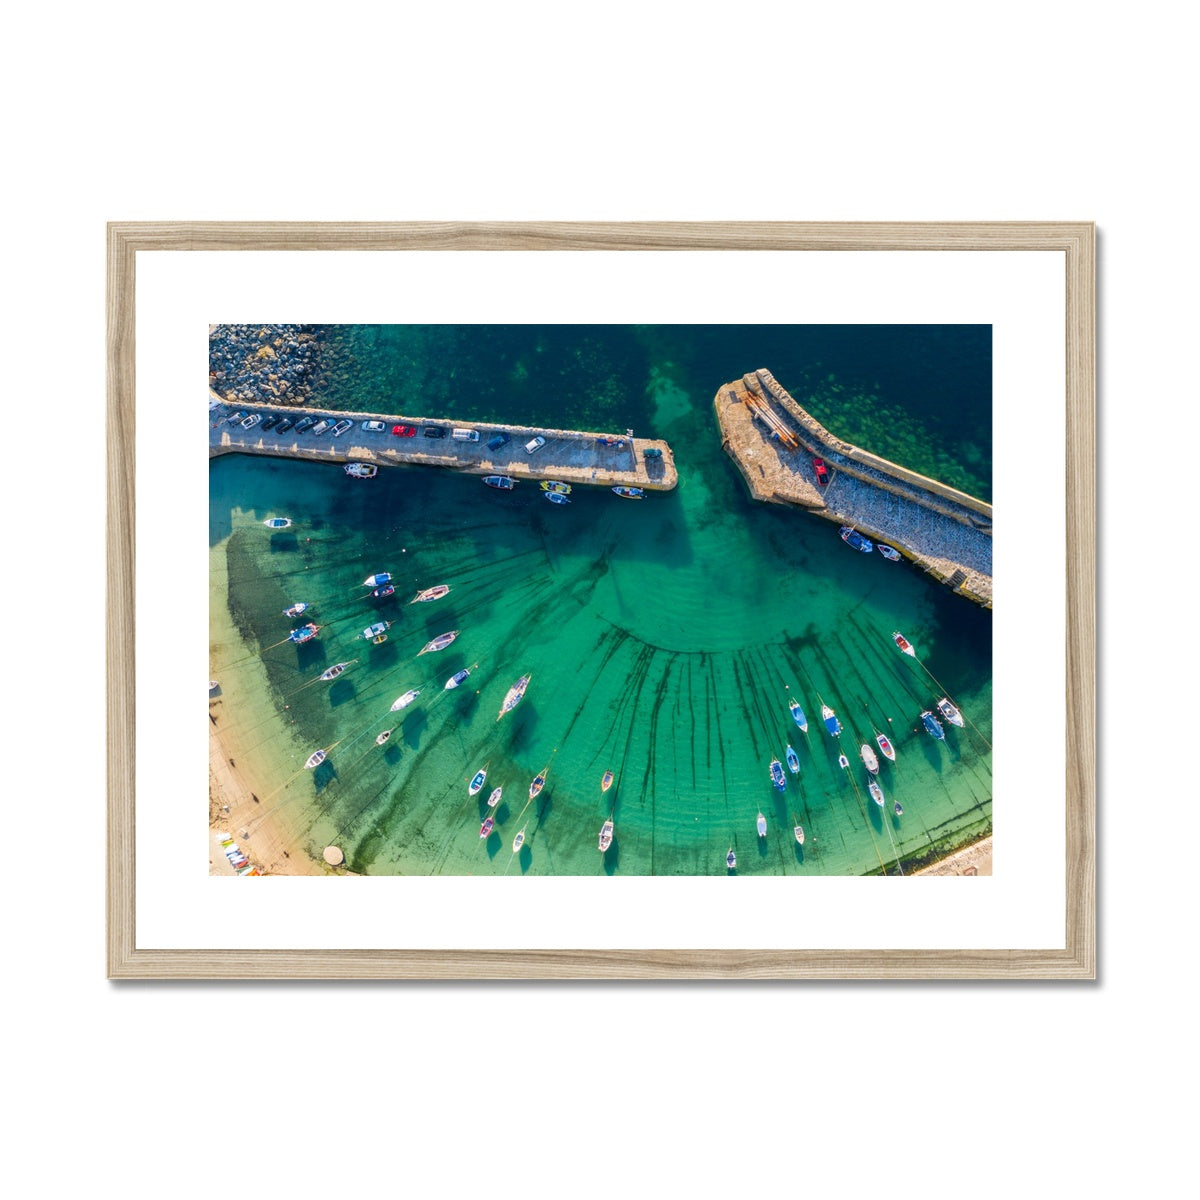 mousehole harbour wooden frame